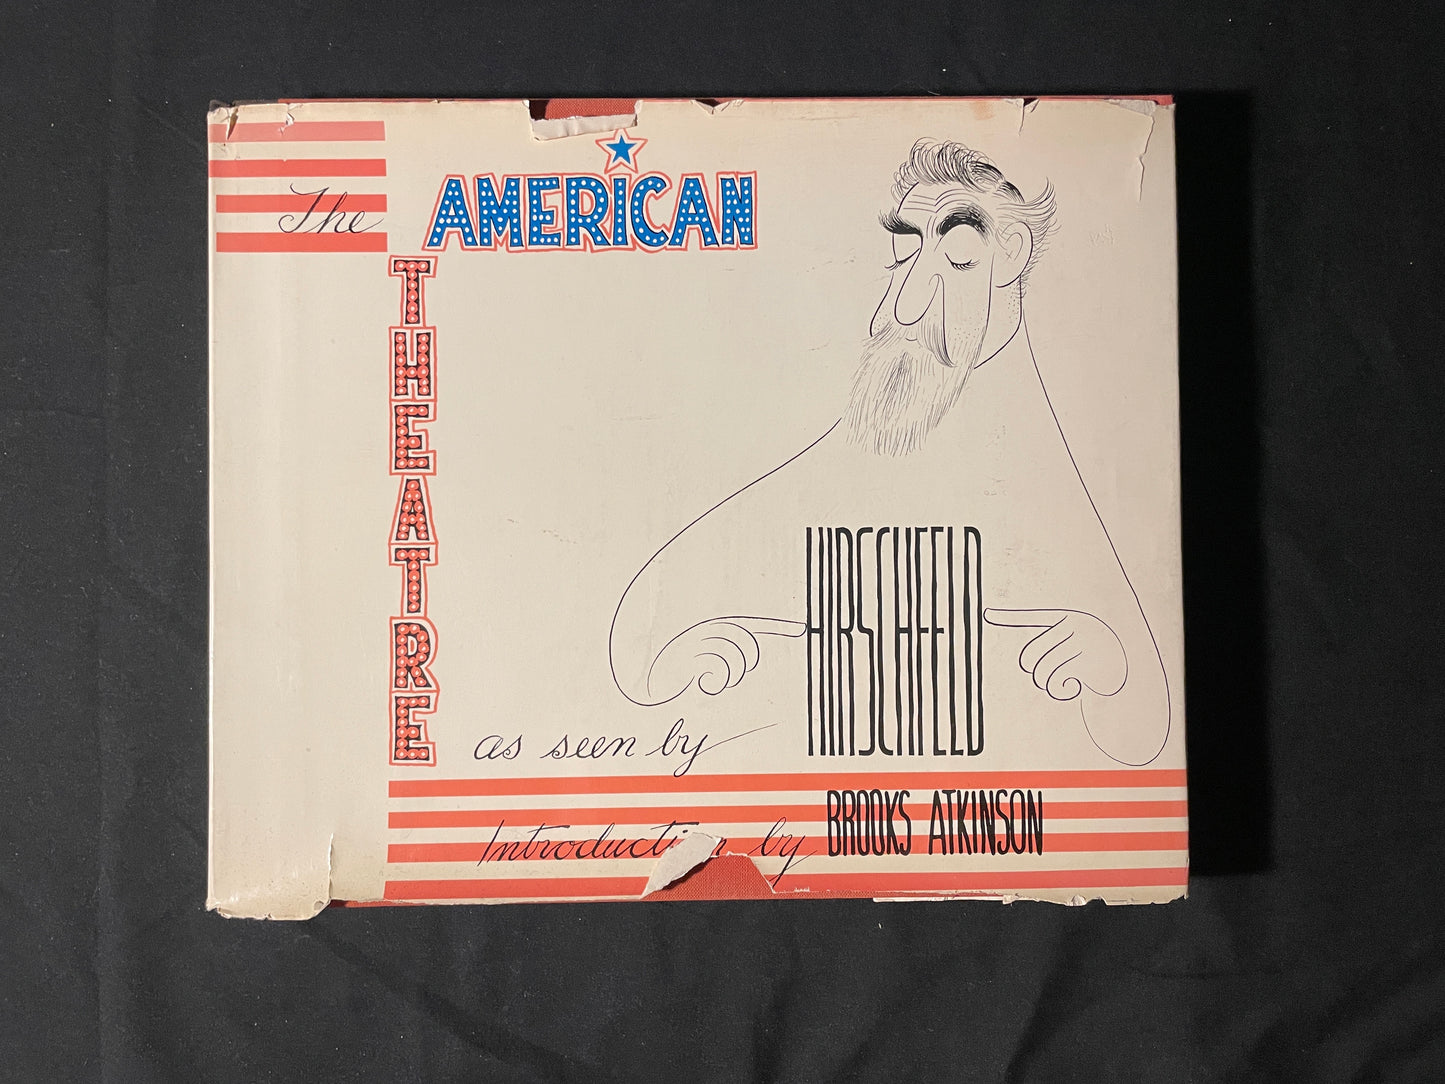 SIGNED The American Theatre as Seen by Al Hirschfeld